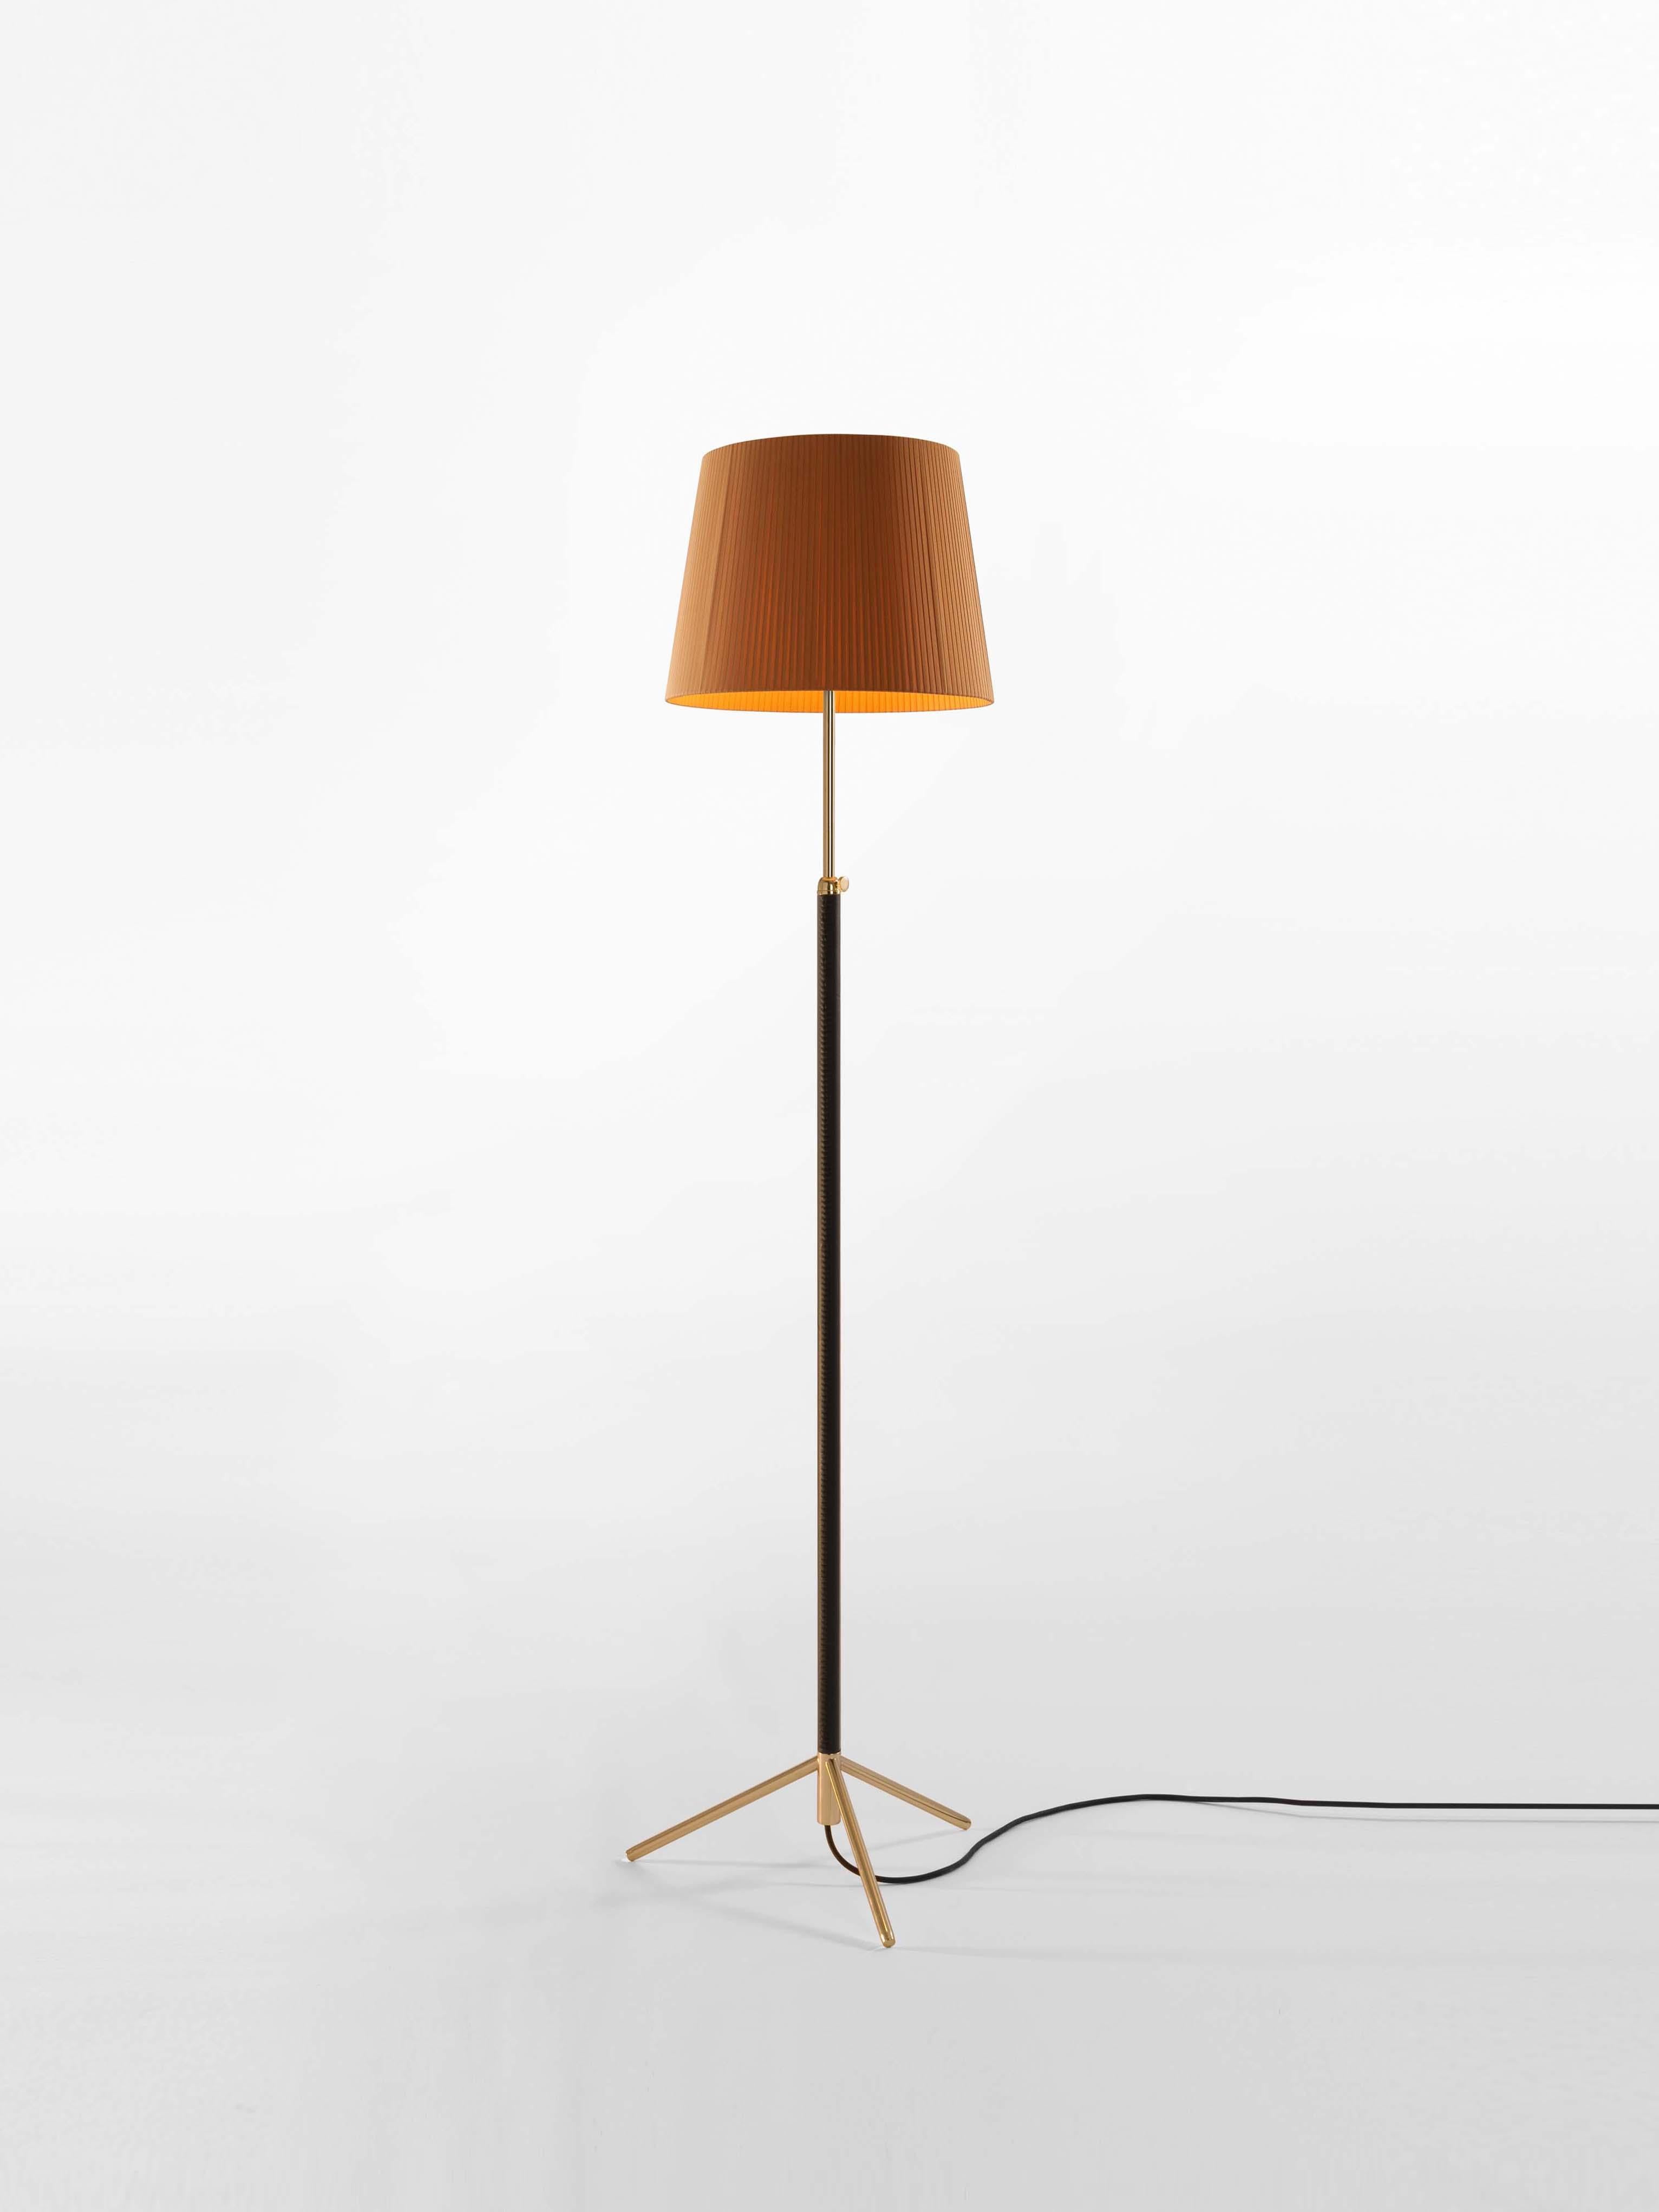 Mustard and brass Pie de Salón G3 floor lamp by Jaume Sans
Dimensions: D 40 x H 120-160 cm
Materials: Metal, leather, ribbon.
Available in chrome-plated or polished brass structure.
Available in other shade colors and sizes.

This slender